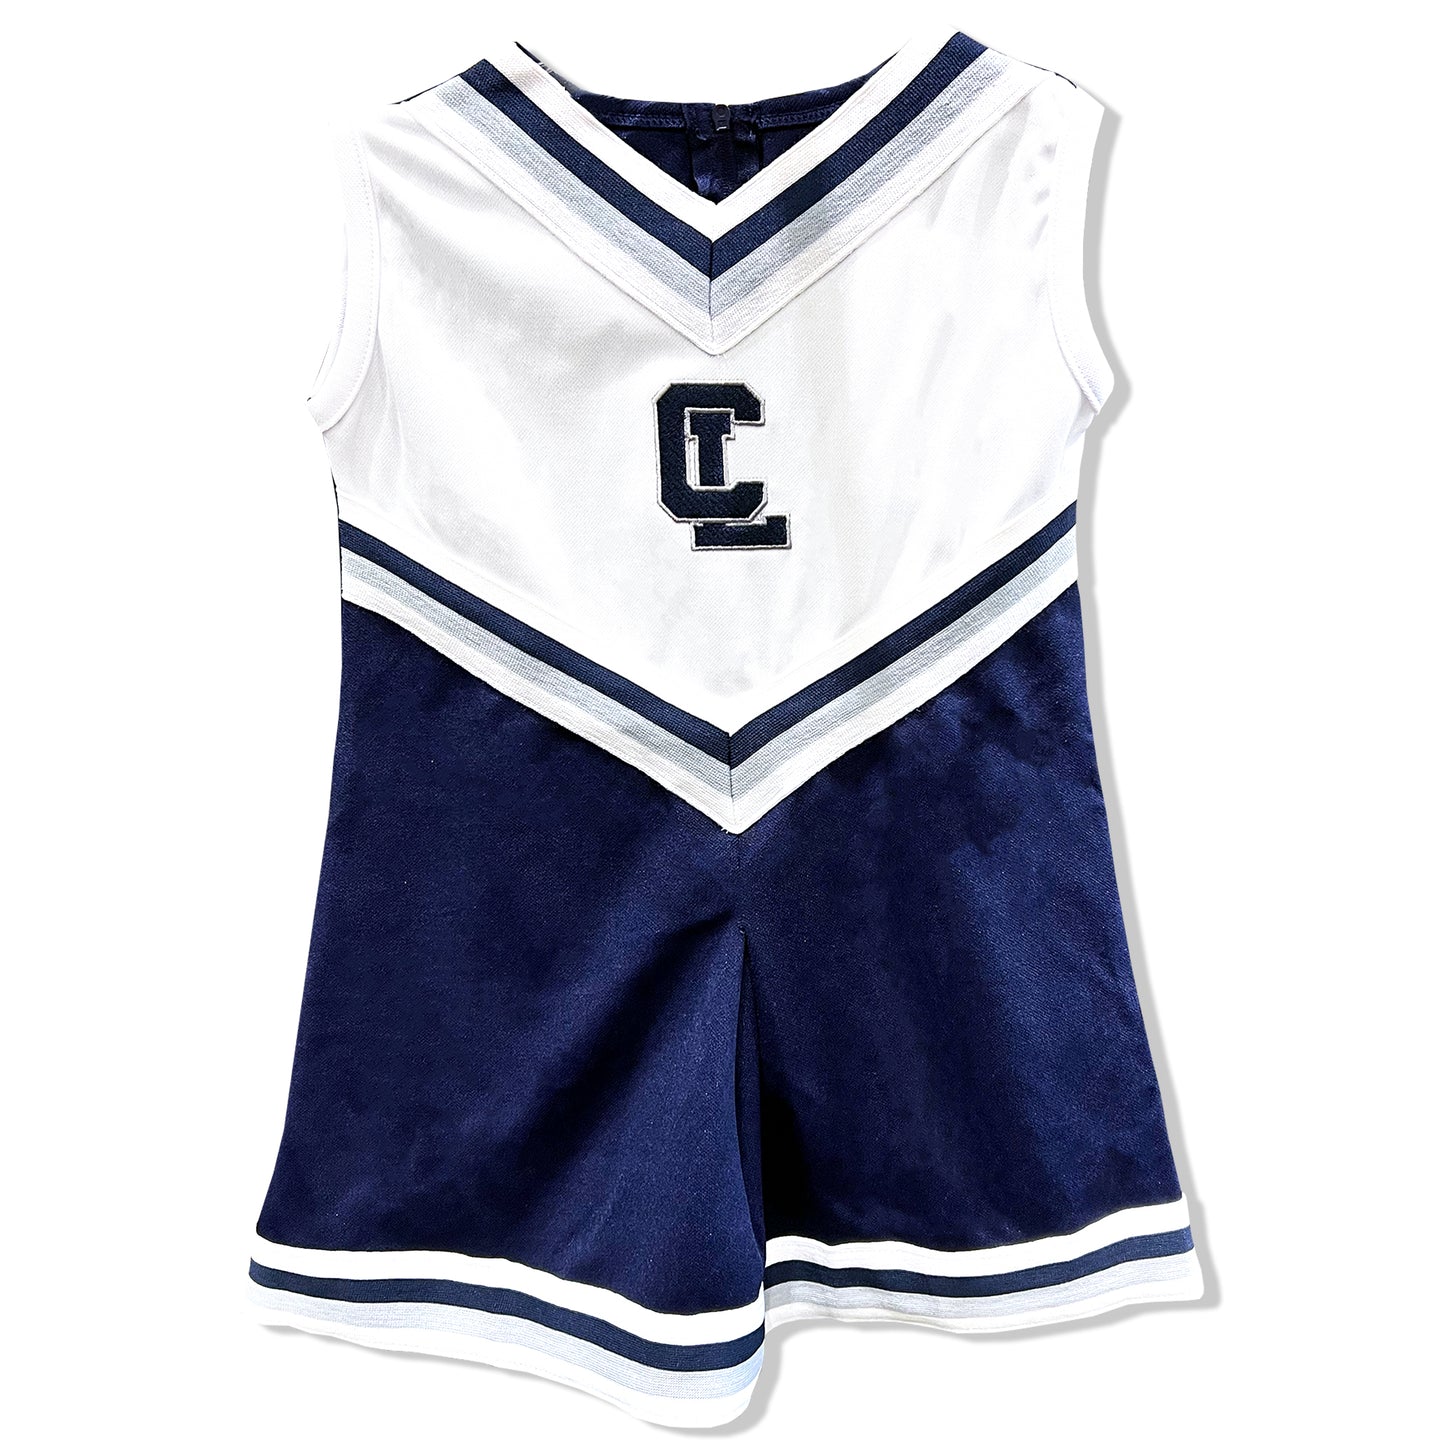 Youth One Piece Cheer Jumper